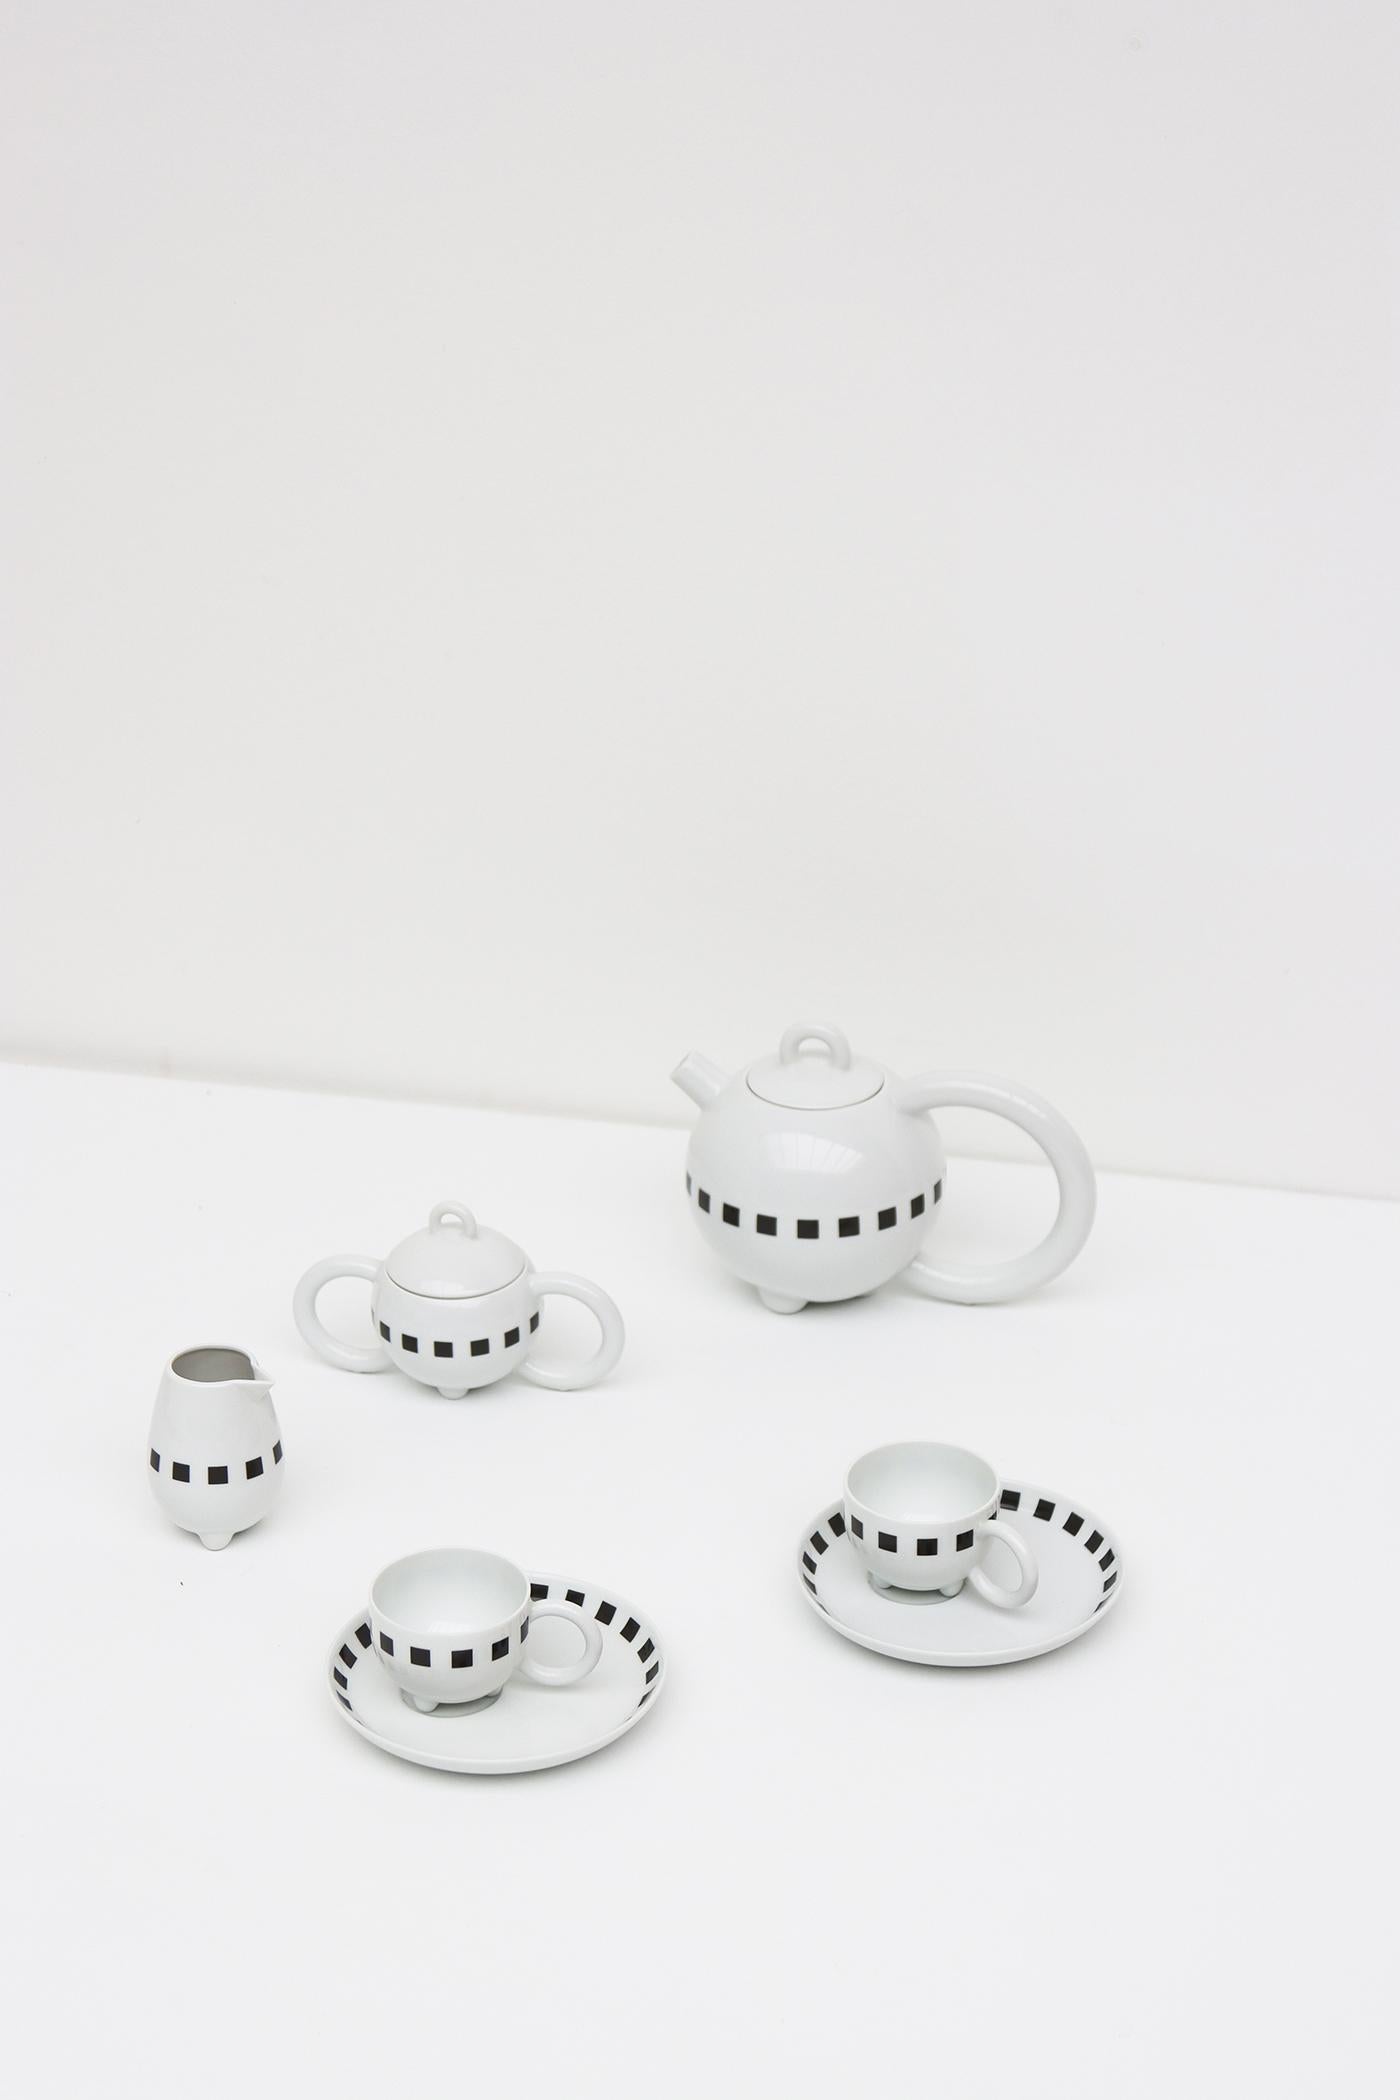 Matteo Thun was one of the co-founders of the Memphis group in 1981. He worked together with many different companies such as Bieffeplast, Swatch and Tiffany. This porcelain coffee / tea set he designed for Arzberg, Germany in the 1980s. Thun